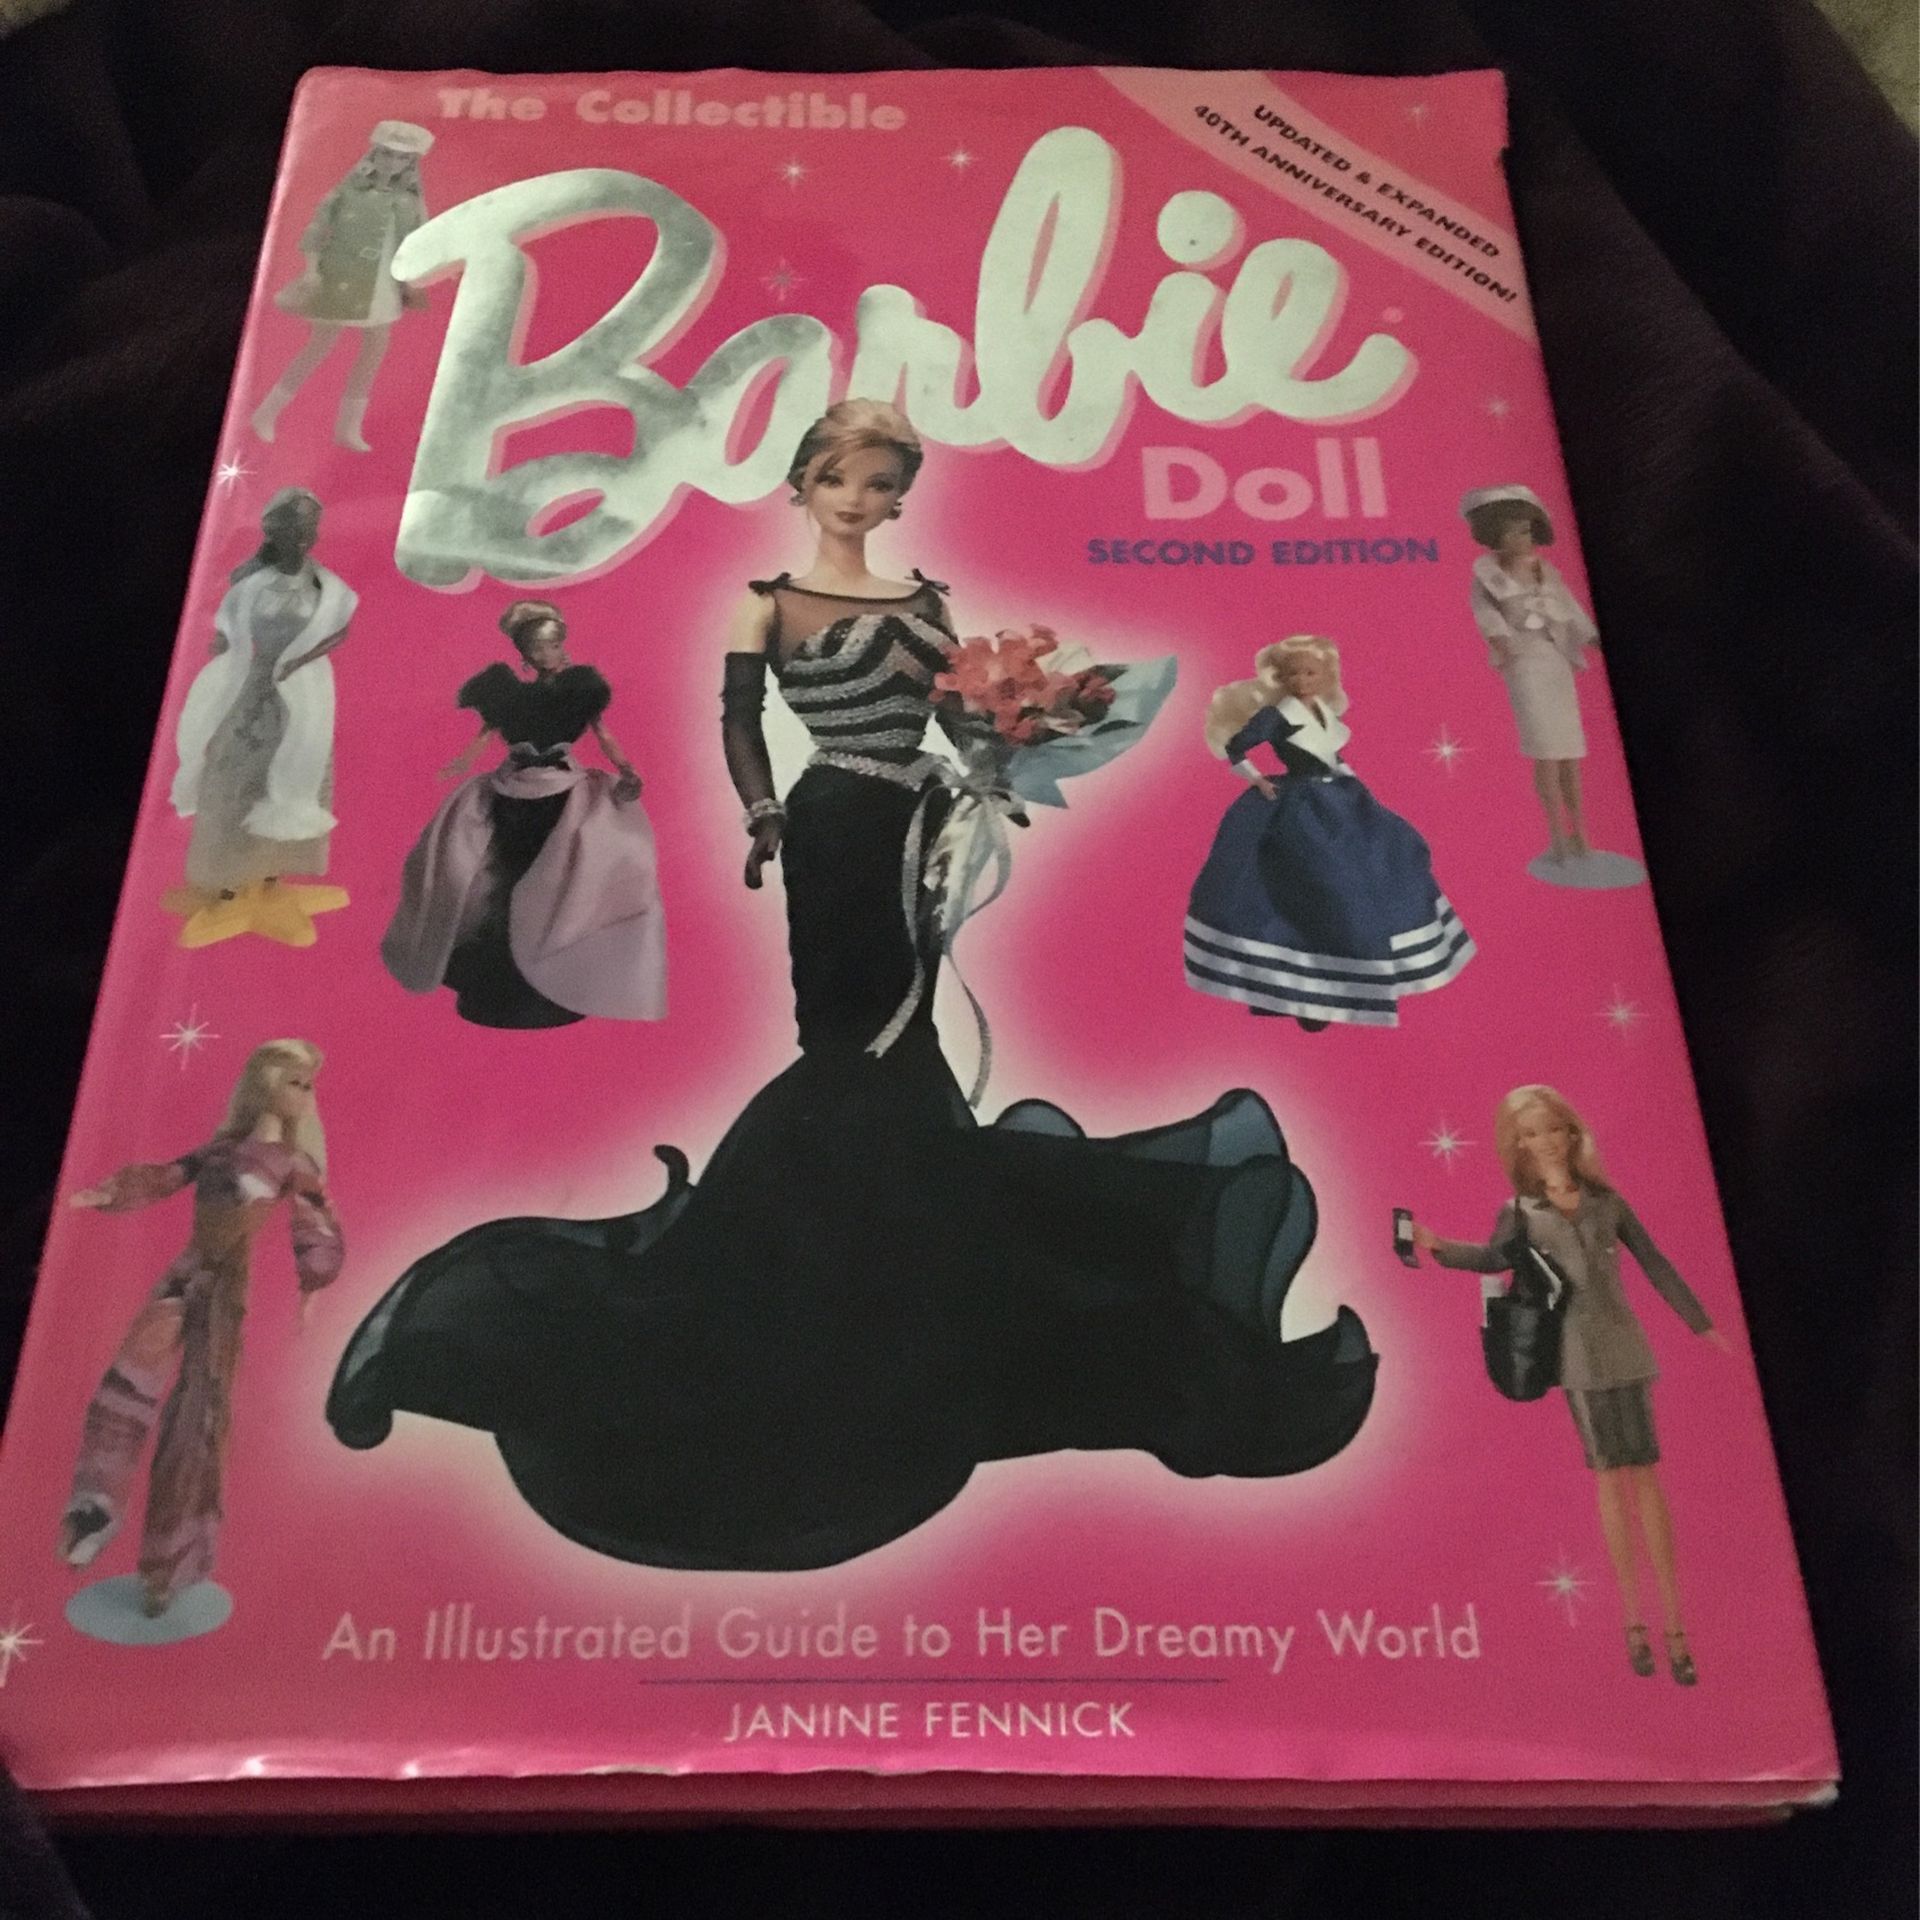   Vintage BARBIE DOLL Second edition ( The collectibles ) BOOK 